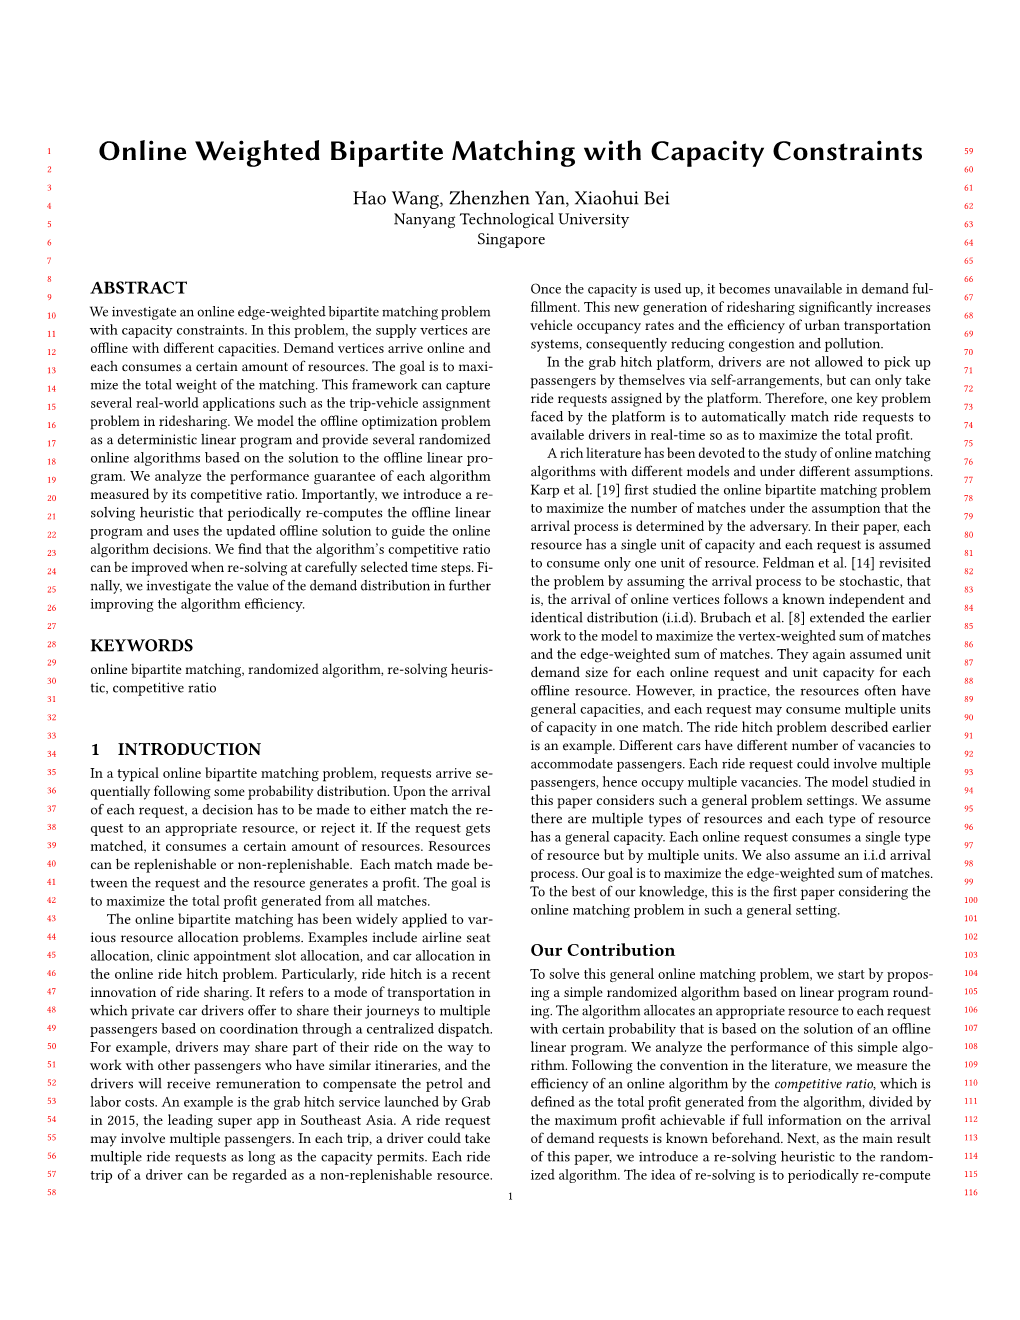 Online Weighted Bipartite Matching with Capacity Constraints